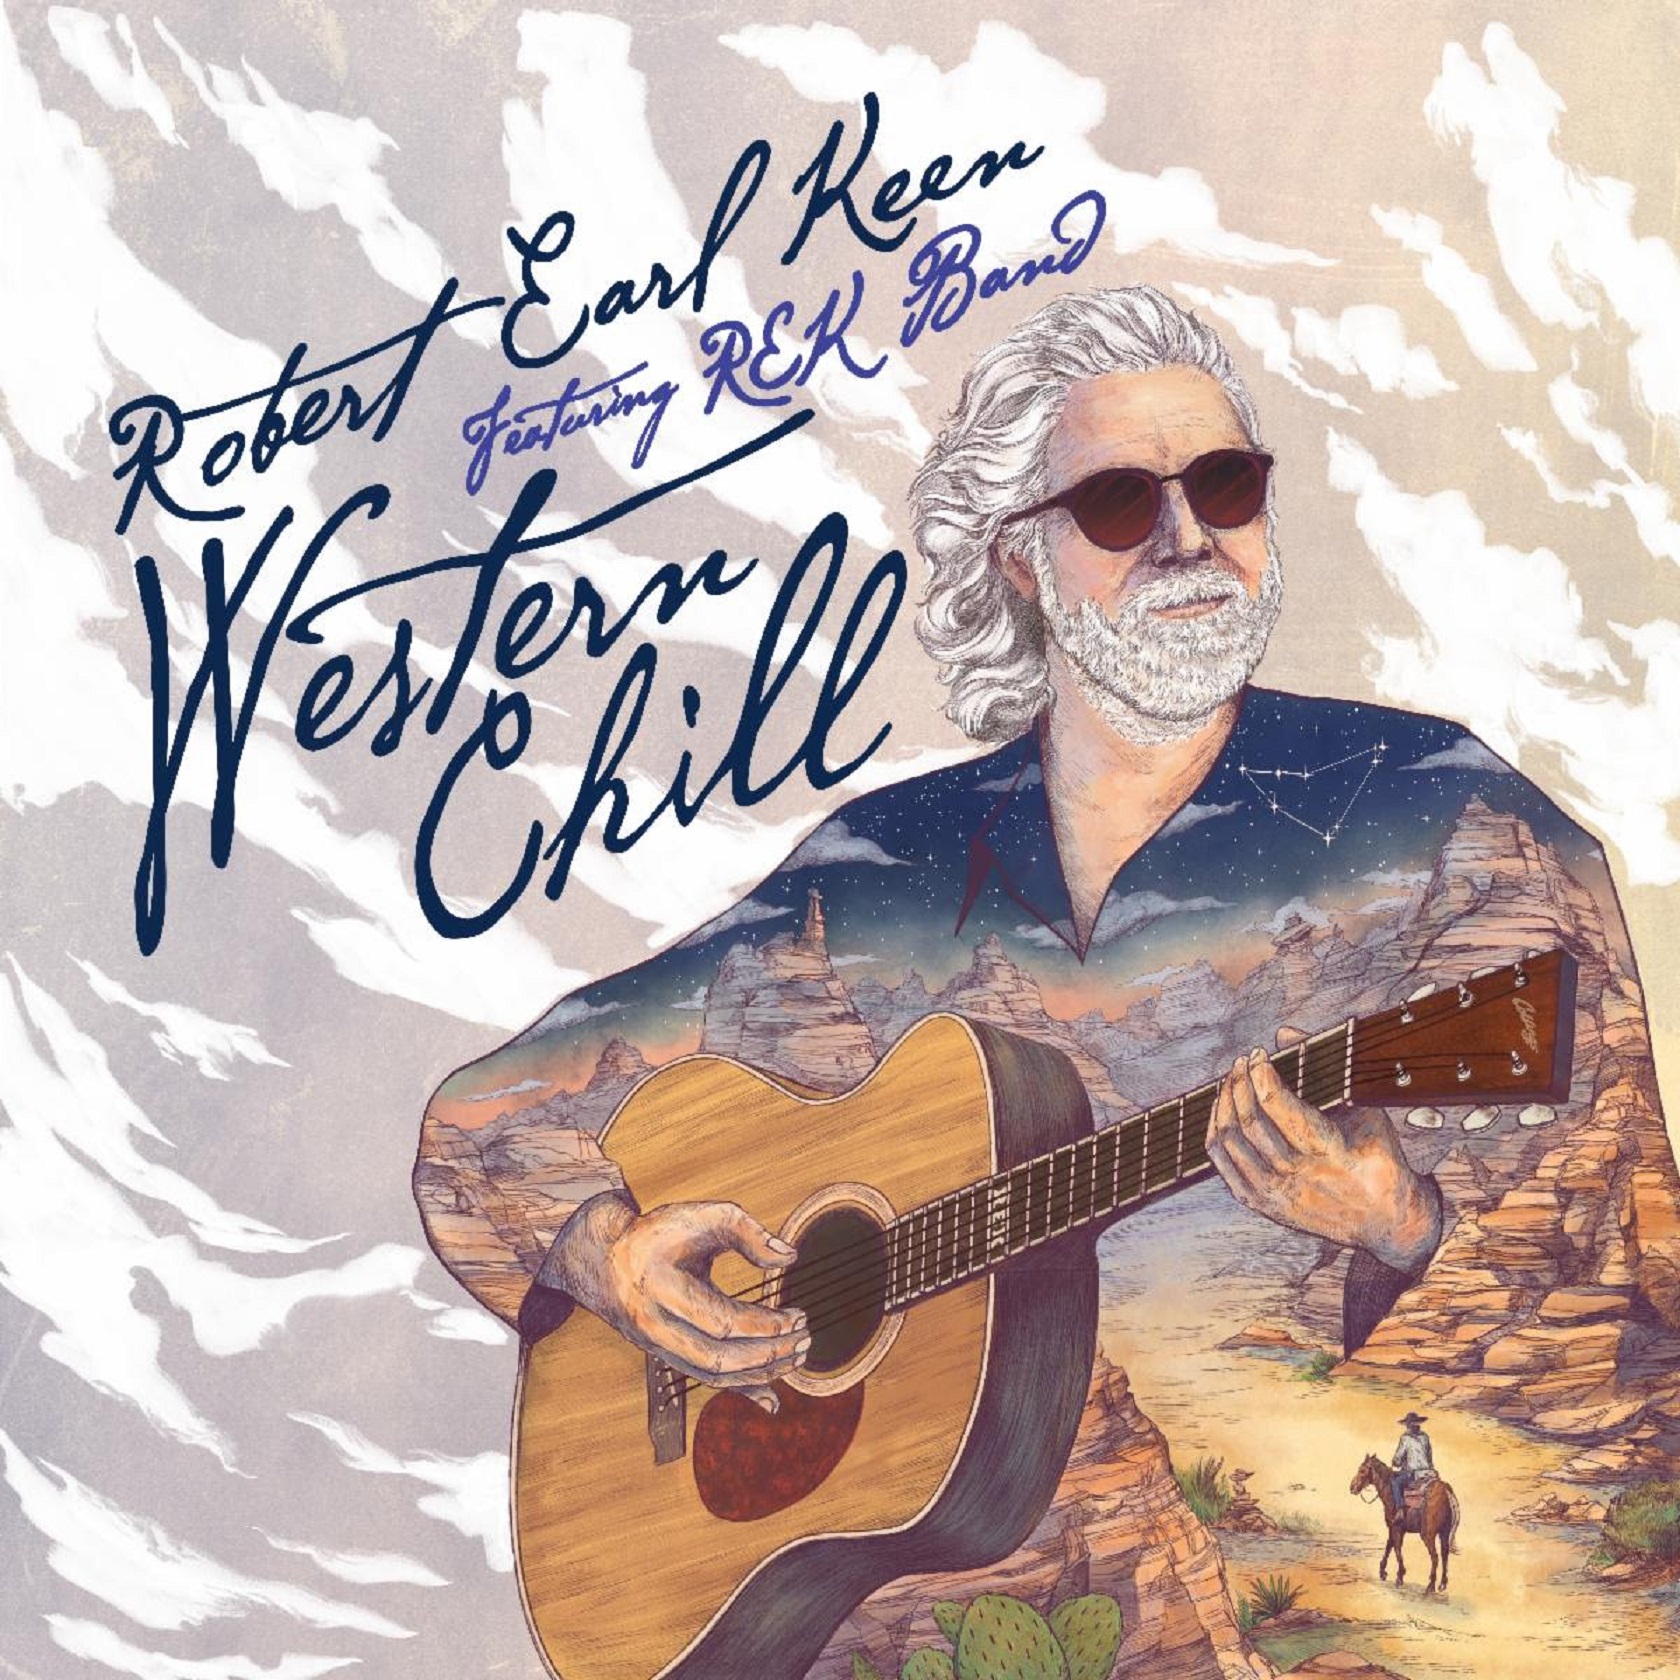 Robert Earl Keen And Band Release Western Chill Into The Digital World Today